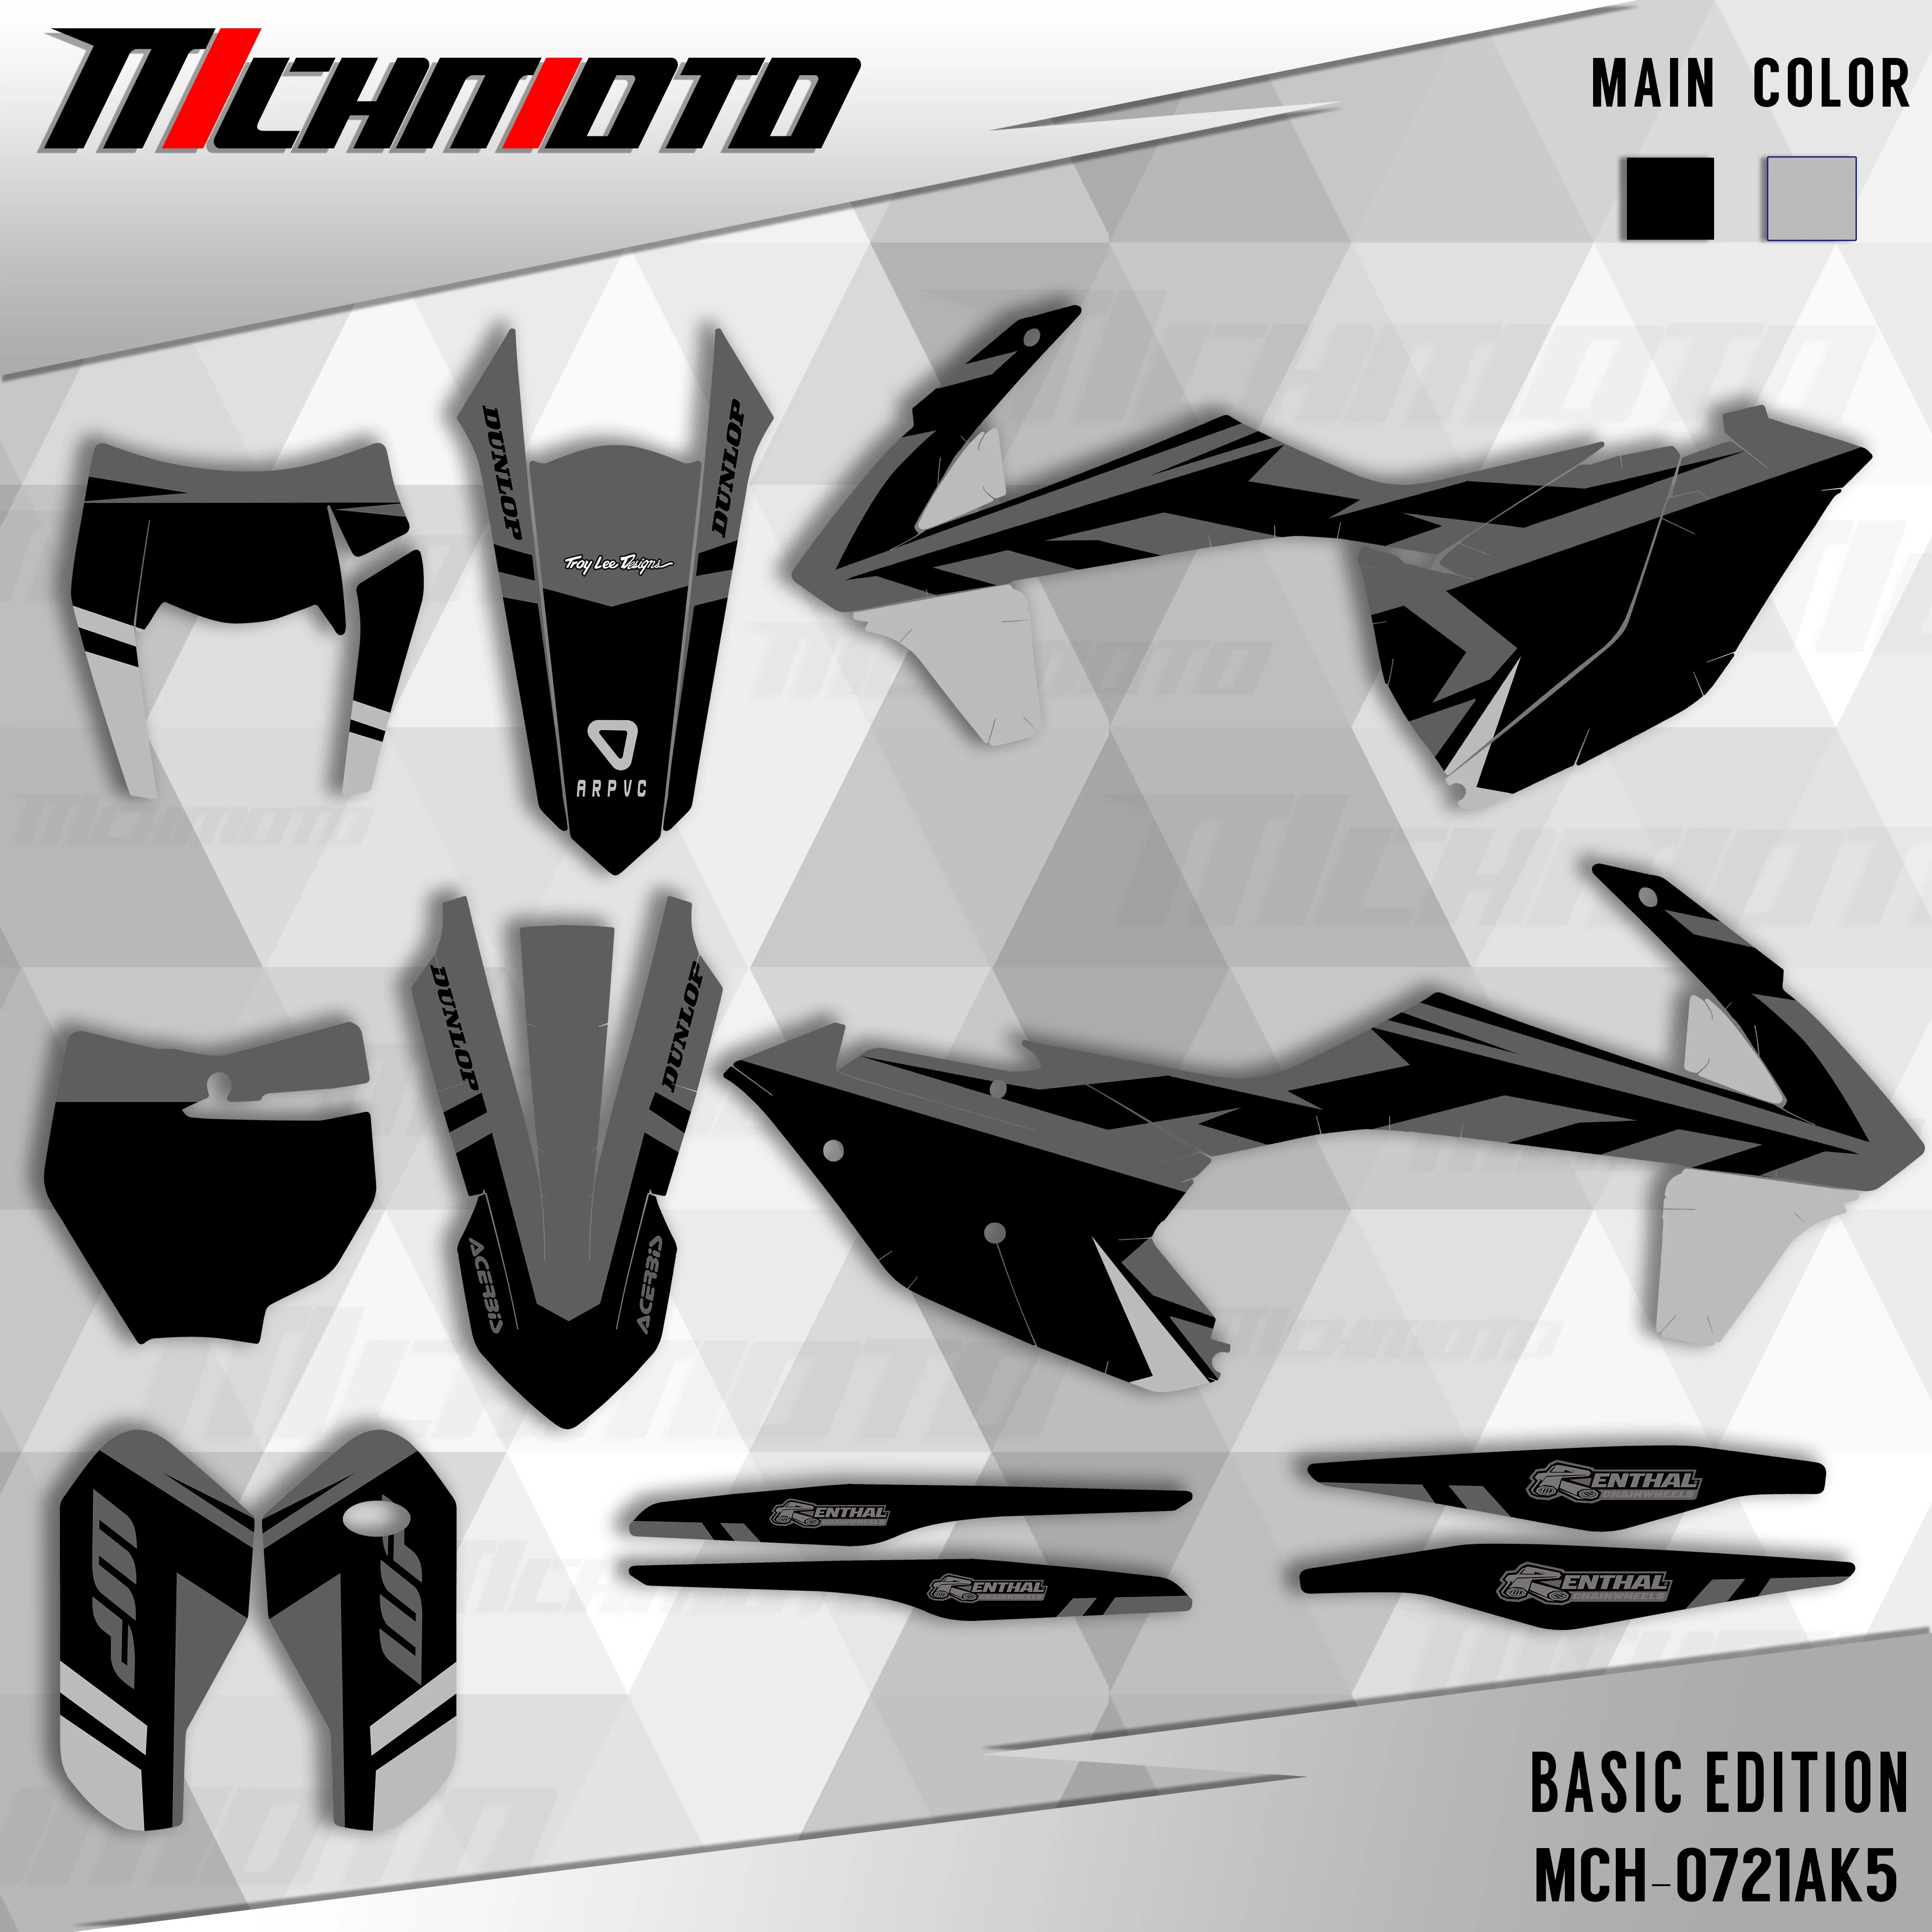 

MCHMFG for KTM 125 250 300 350 450 SX SXF EXC XCW 2011 2012 2013 2014 2015 2016 2017 2018 2019 Graphics Backgrounds Stickers Kit